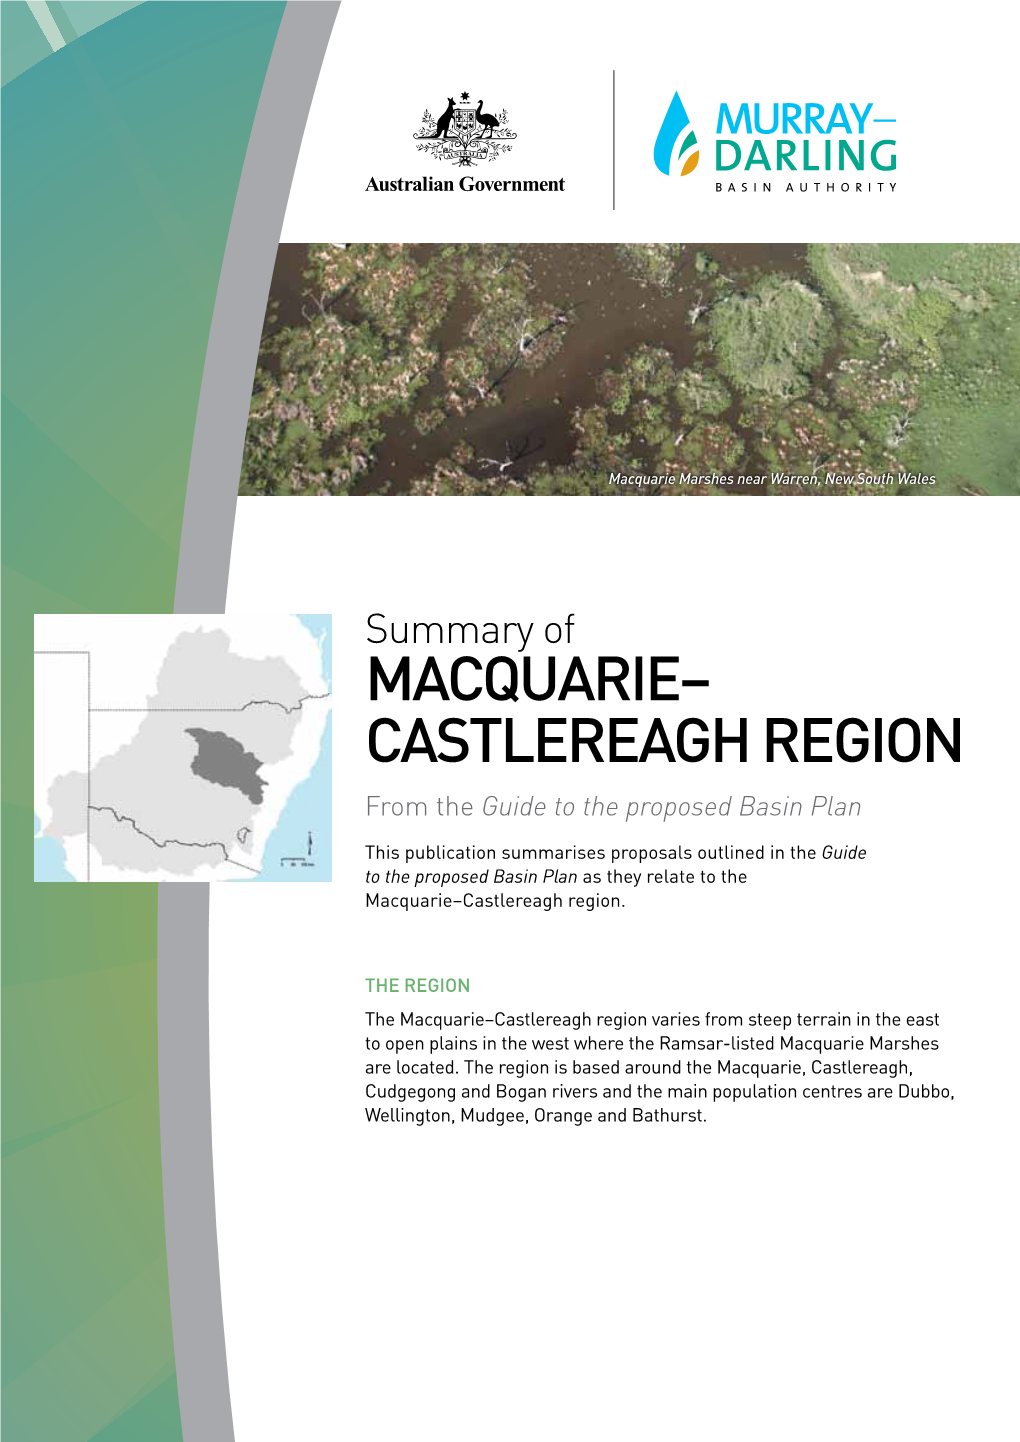 MACQUARIE– CASTLEREAGH REGION from the Guide to the Proposed Basin Plan